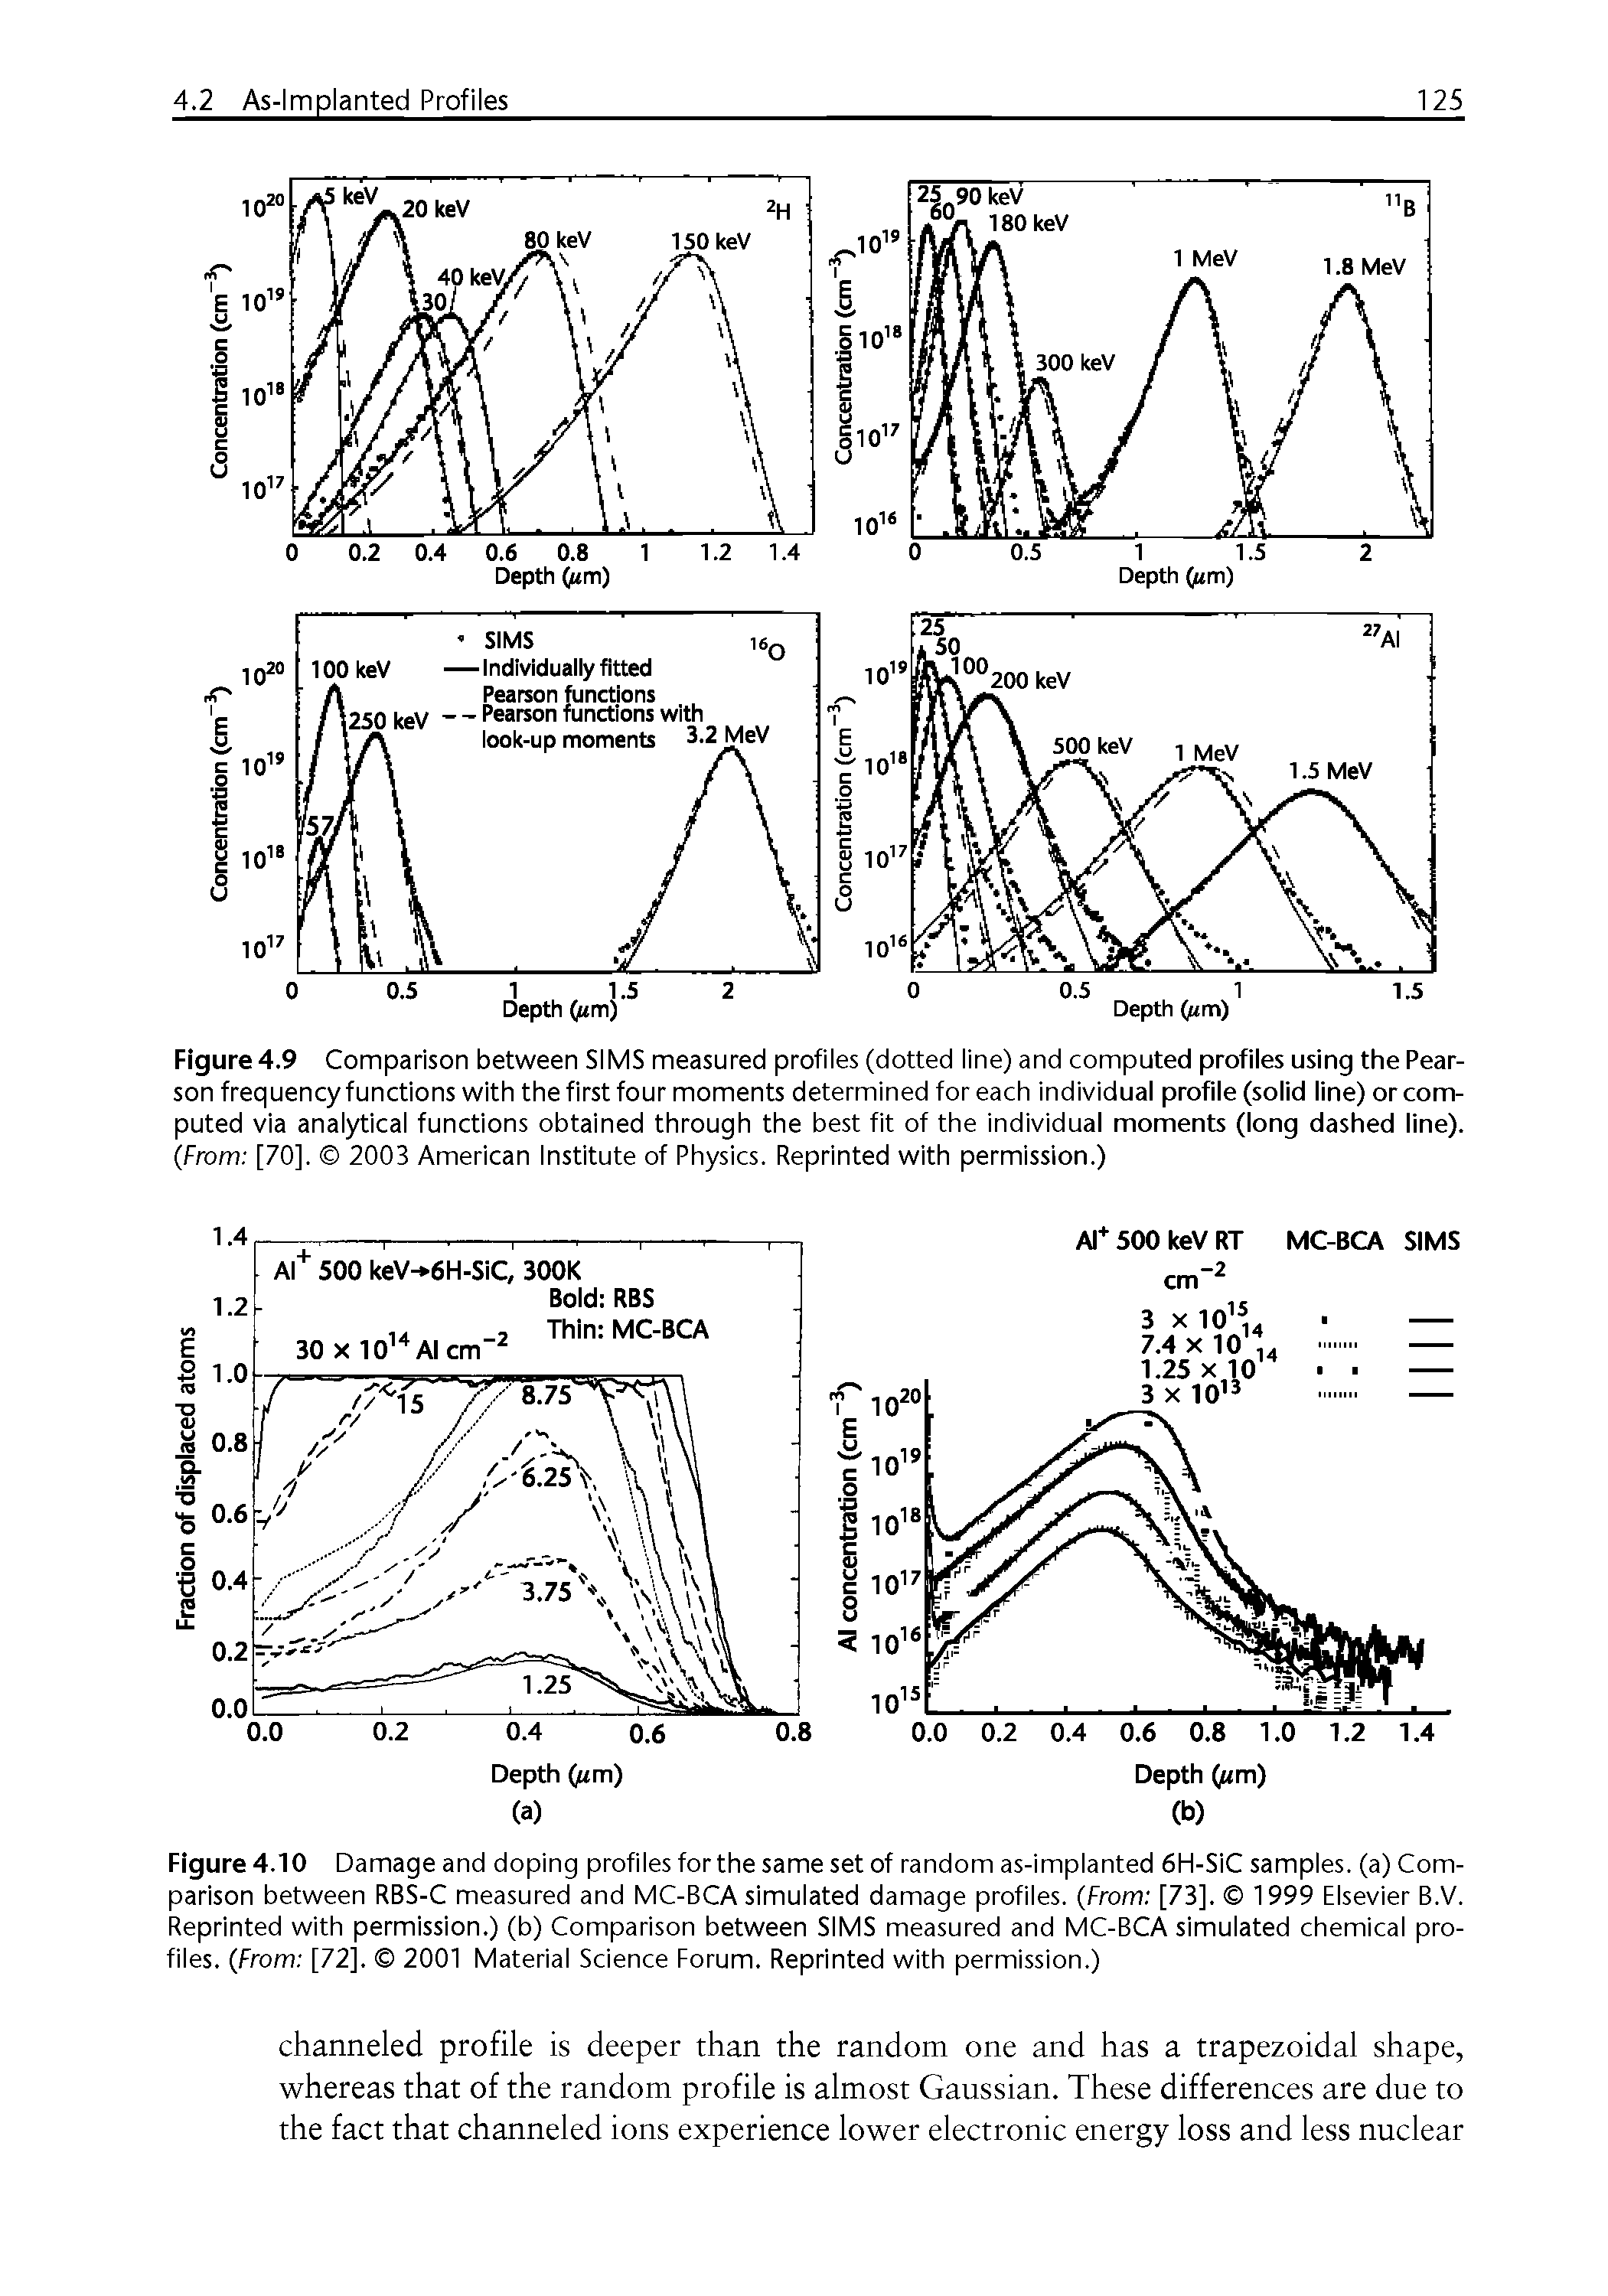 Figure 4.9 Comparison between SIMS measured profiles (dotted line) and computed profiles using the Pearson frequency functions with the first four moments determined for each individual profile (solid line) or computed via analytical functions obtained through the best fit of the individual moments (long dashed line). (From [70]. 2003 American Institute of Physics. Reprinted with permission.)...